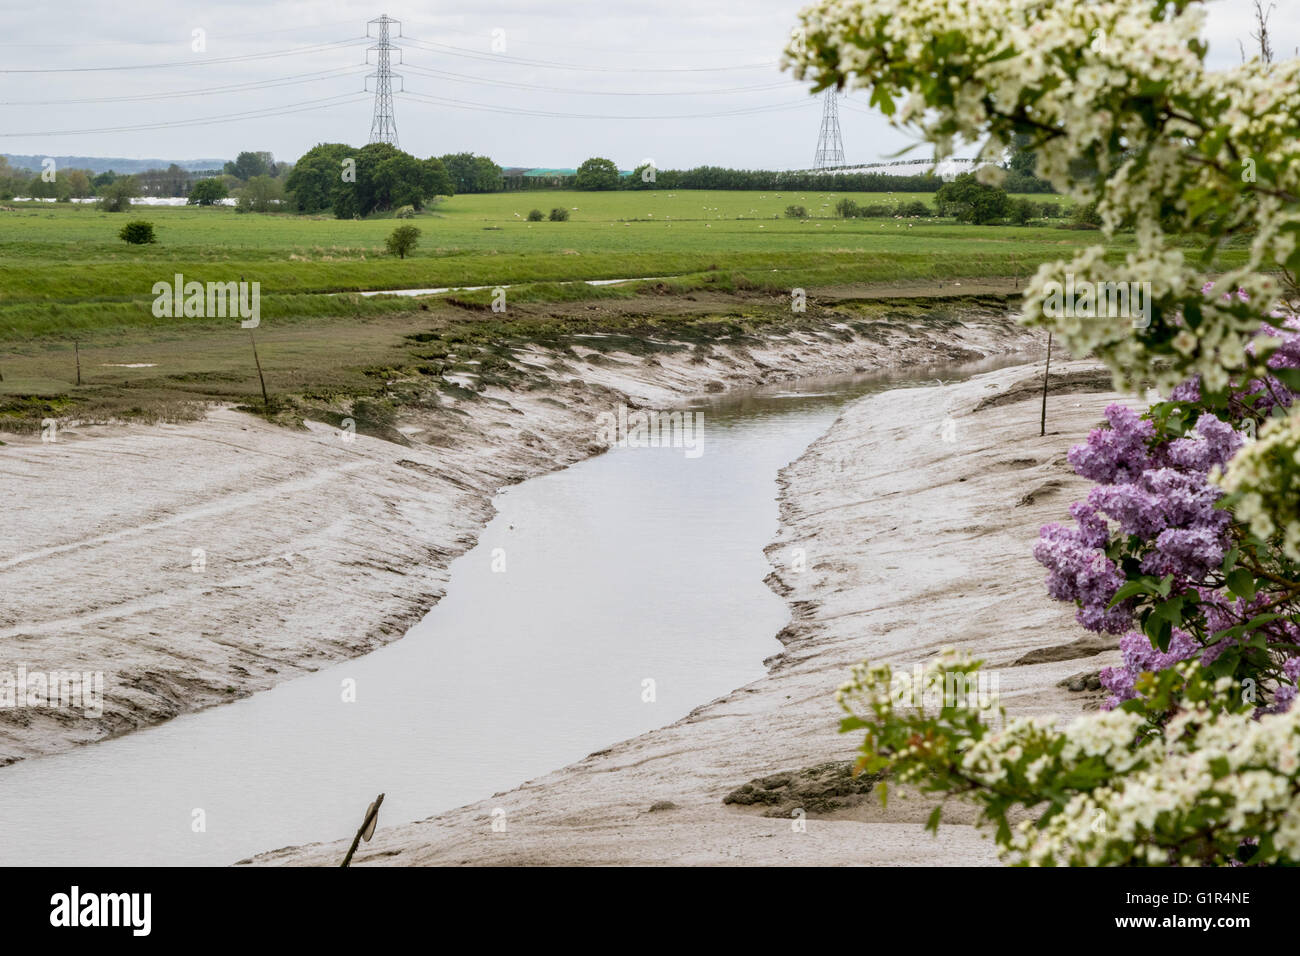 Conyer Creek, Conyer, at low tide with muddy banks, farmland in the background, trees in bloom in the foreground Stock Photo